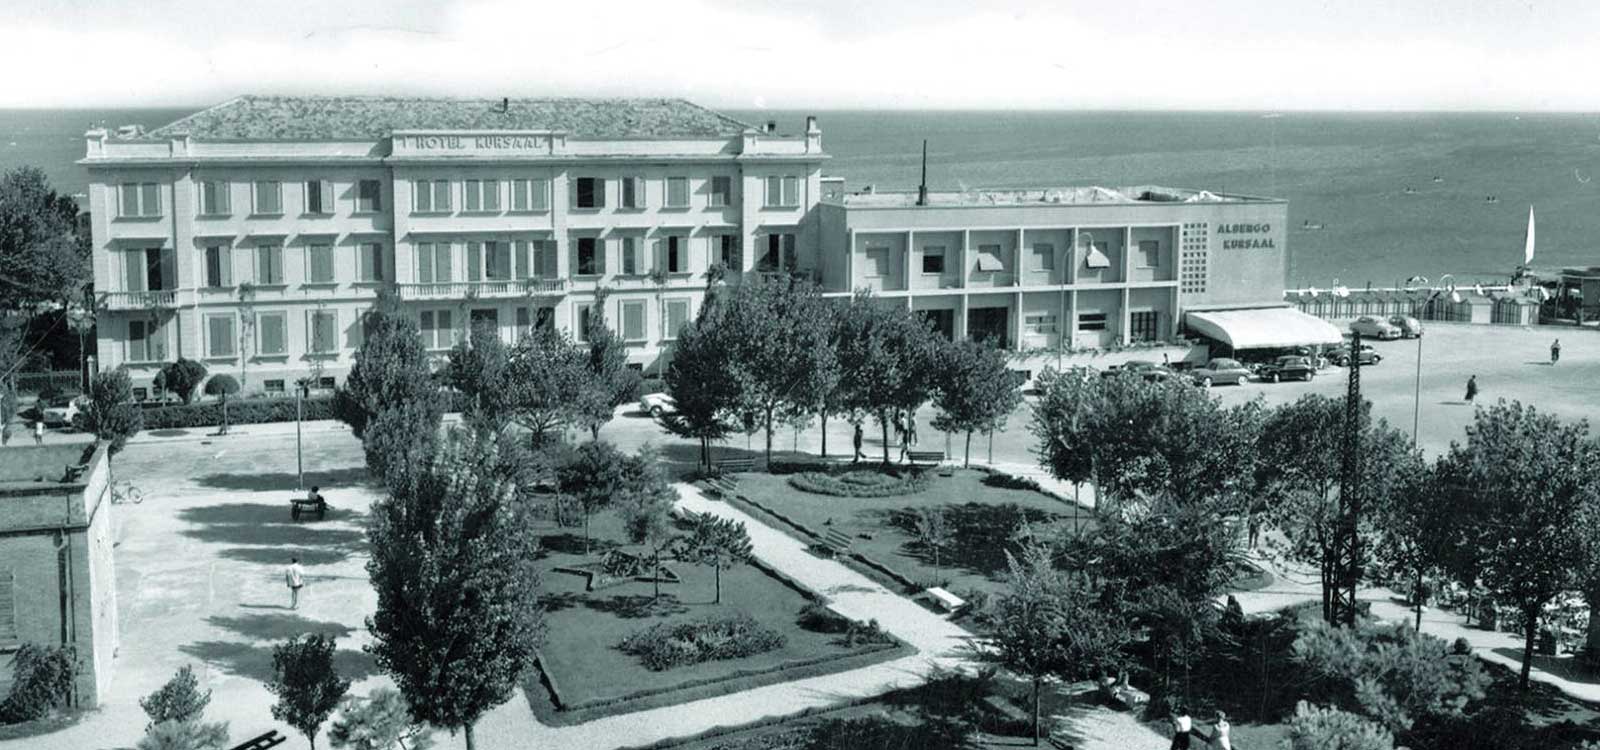 Historical image of the Hotel Kursaal in Cattolica